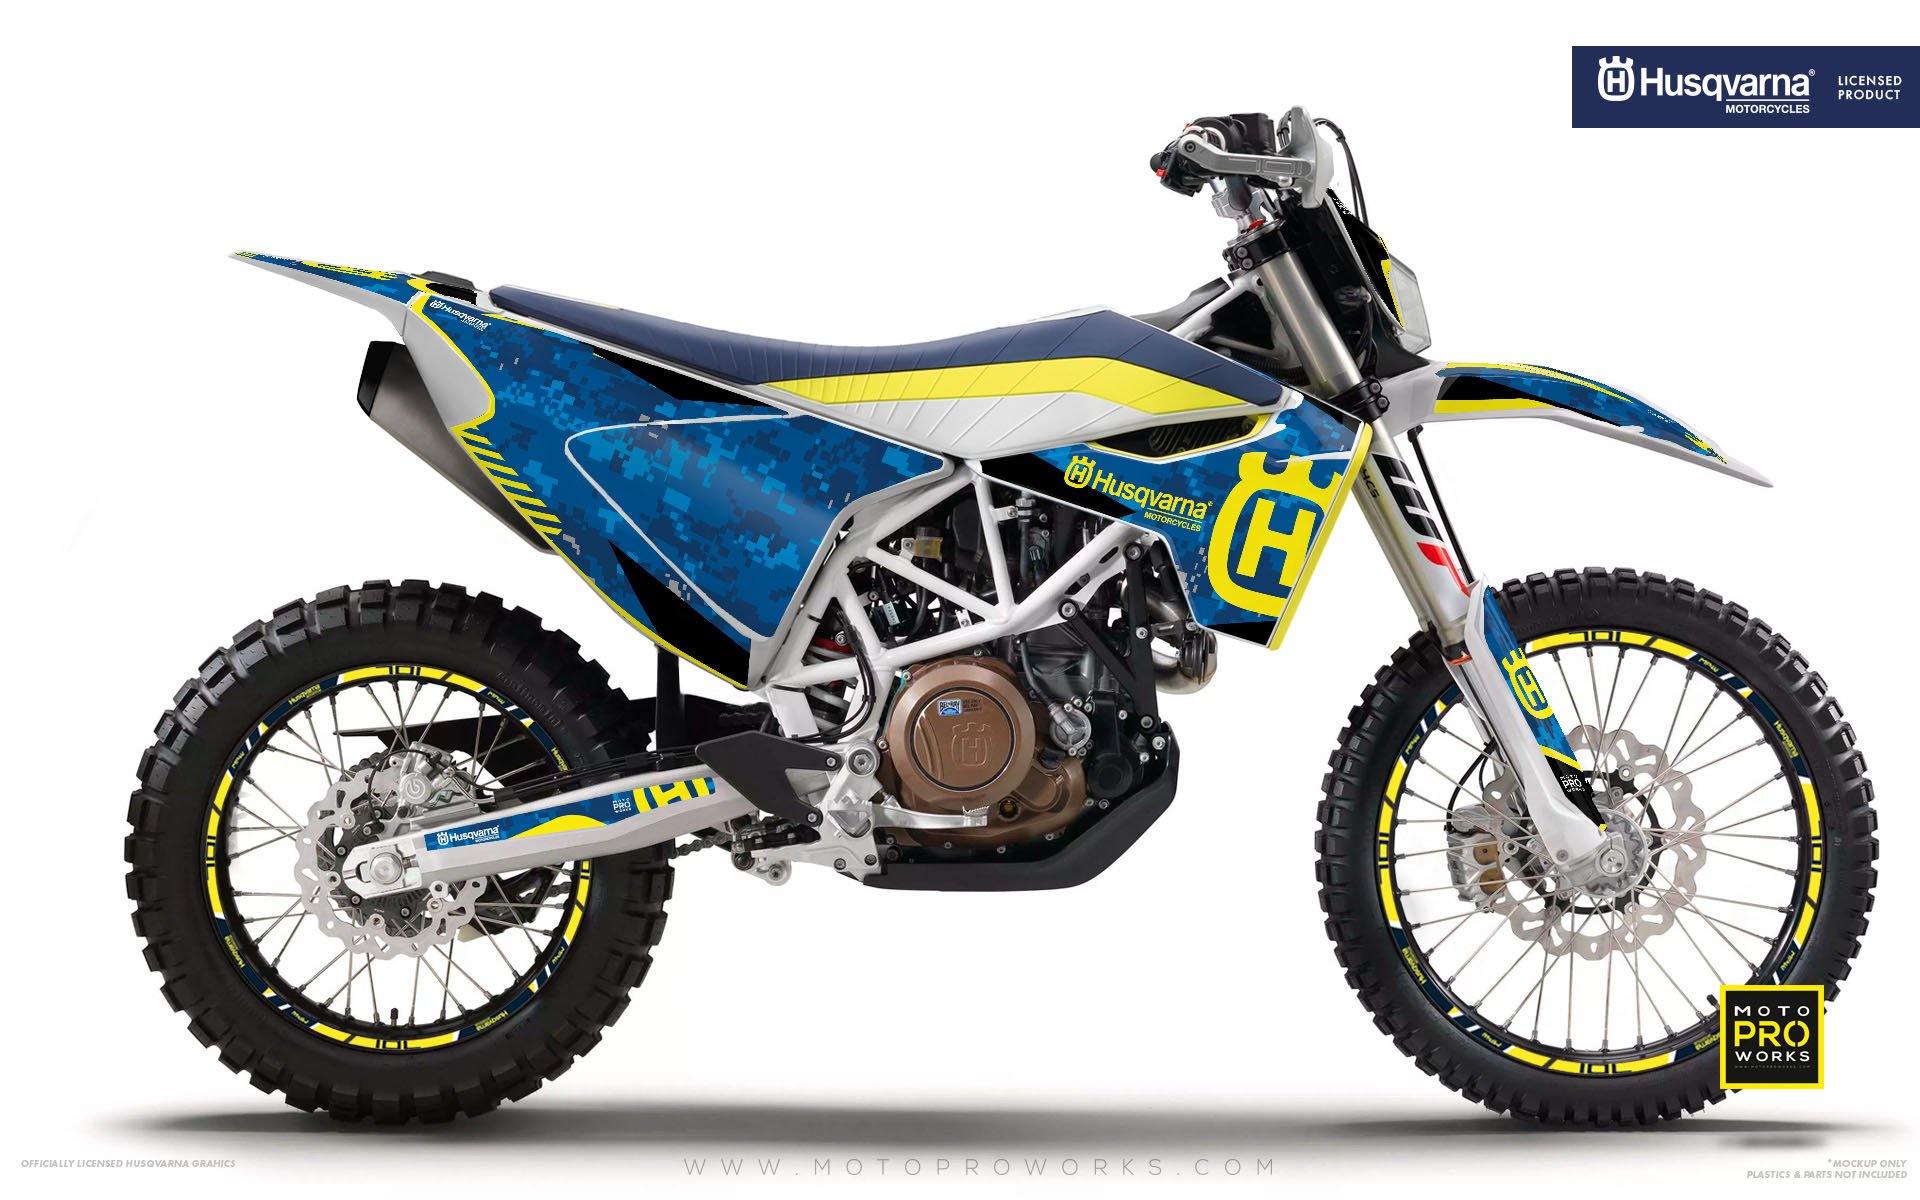 Husqvarna GRAPHIC KIT - "FACTOR" (Marpatcamo/blue) - MotoProWorks | Decals and Bike Graphic kit